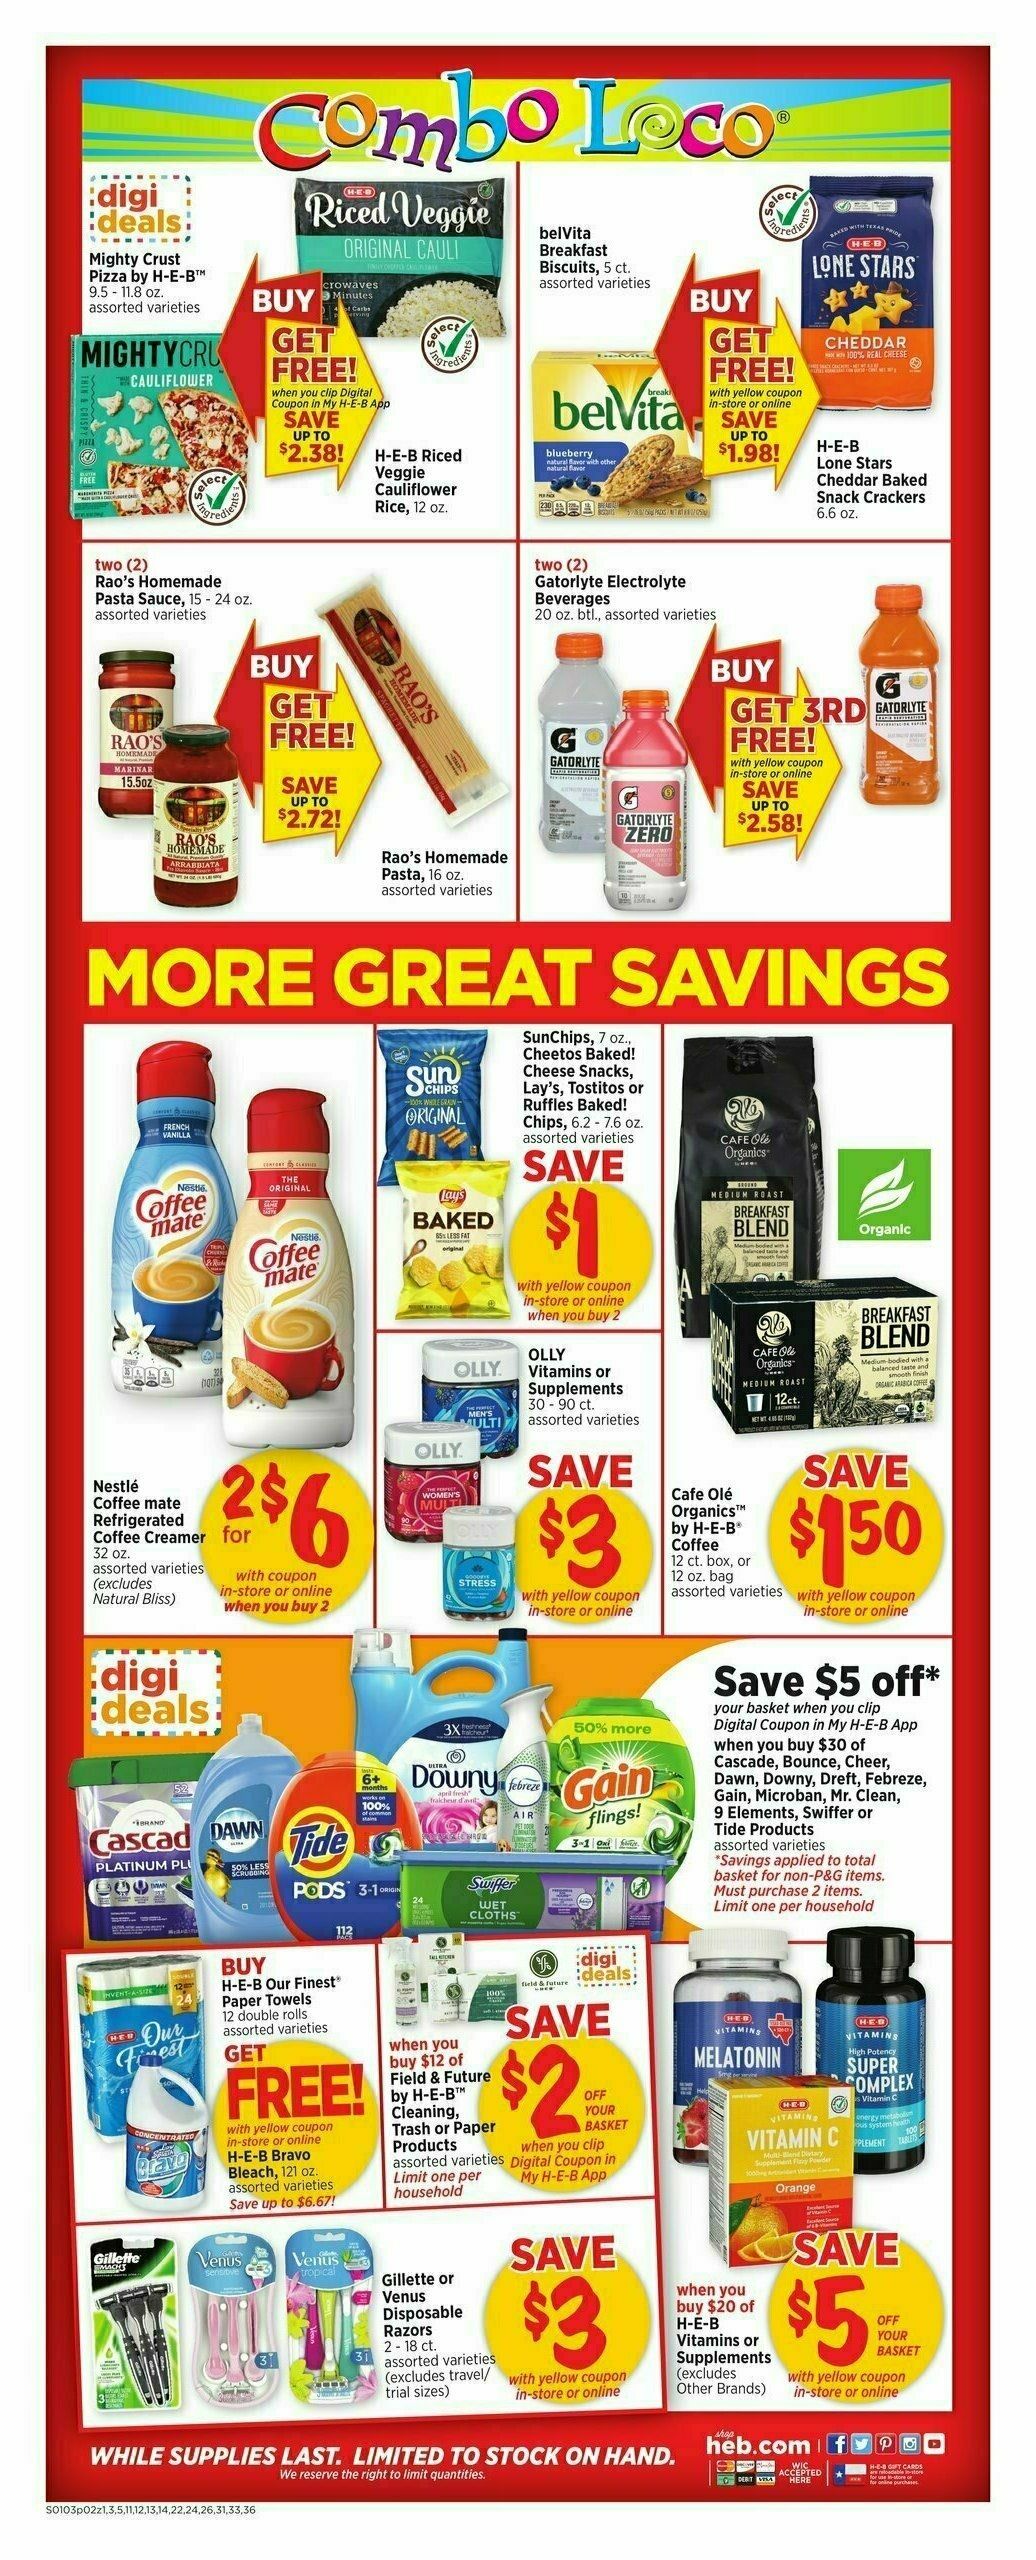 H-E-B Weekly Ad from January 3